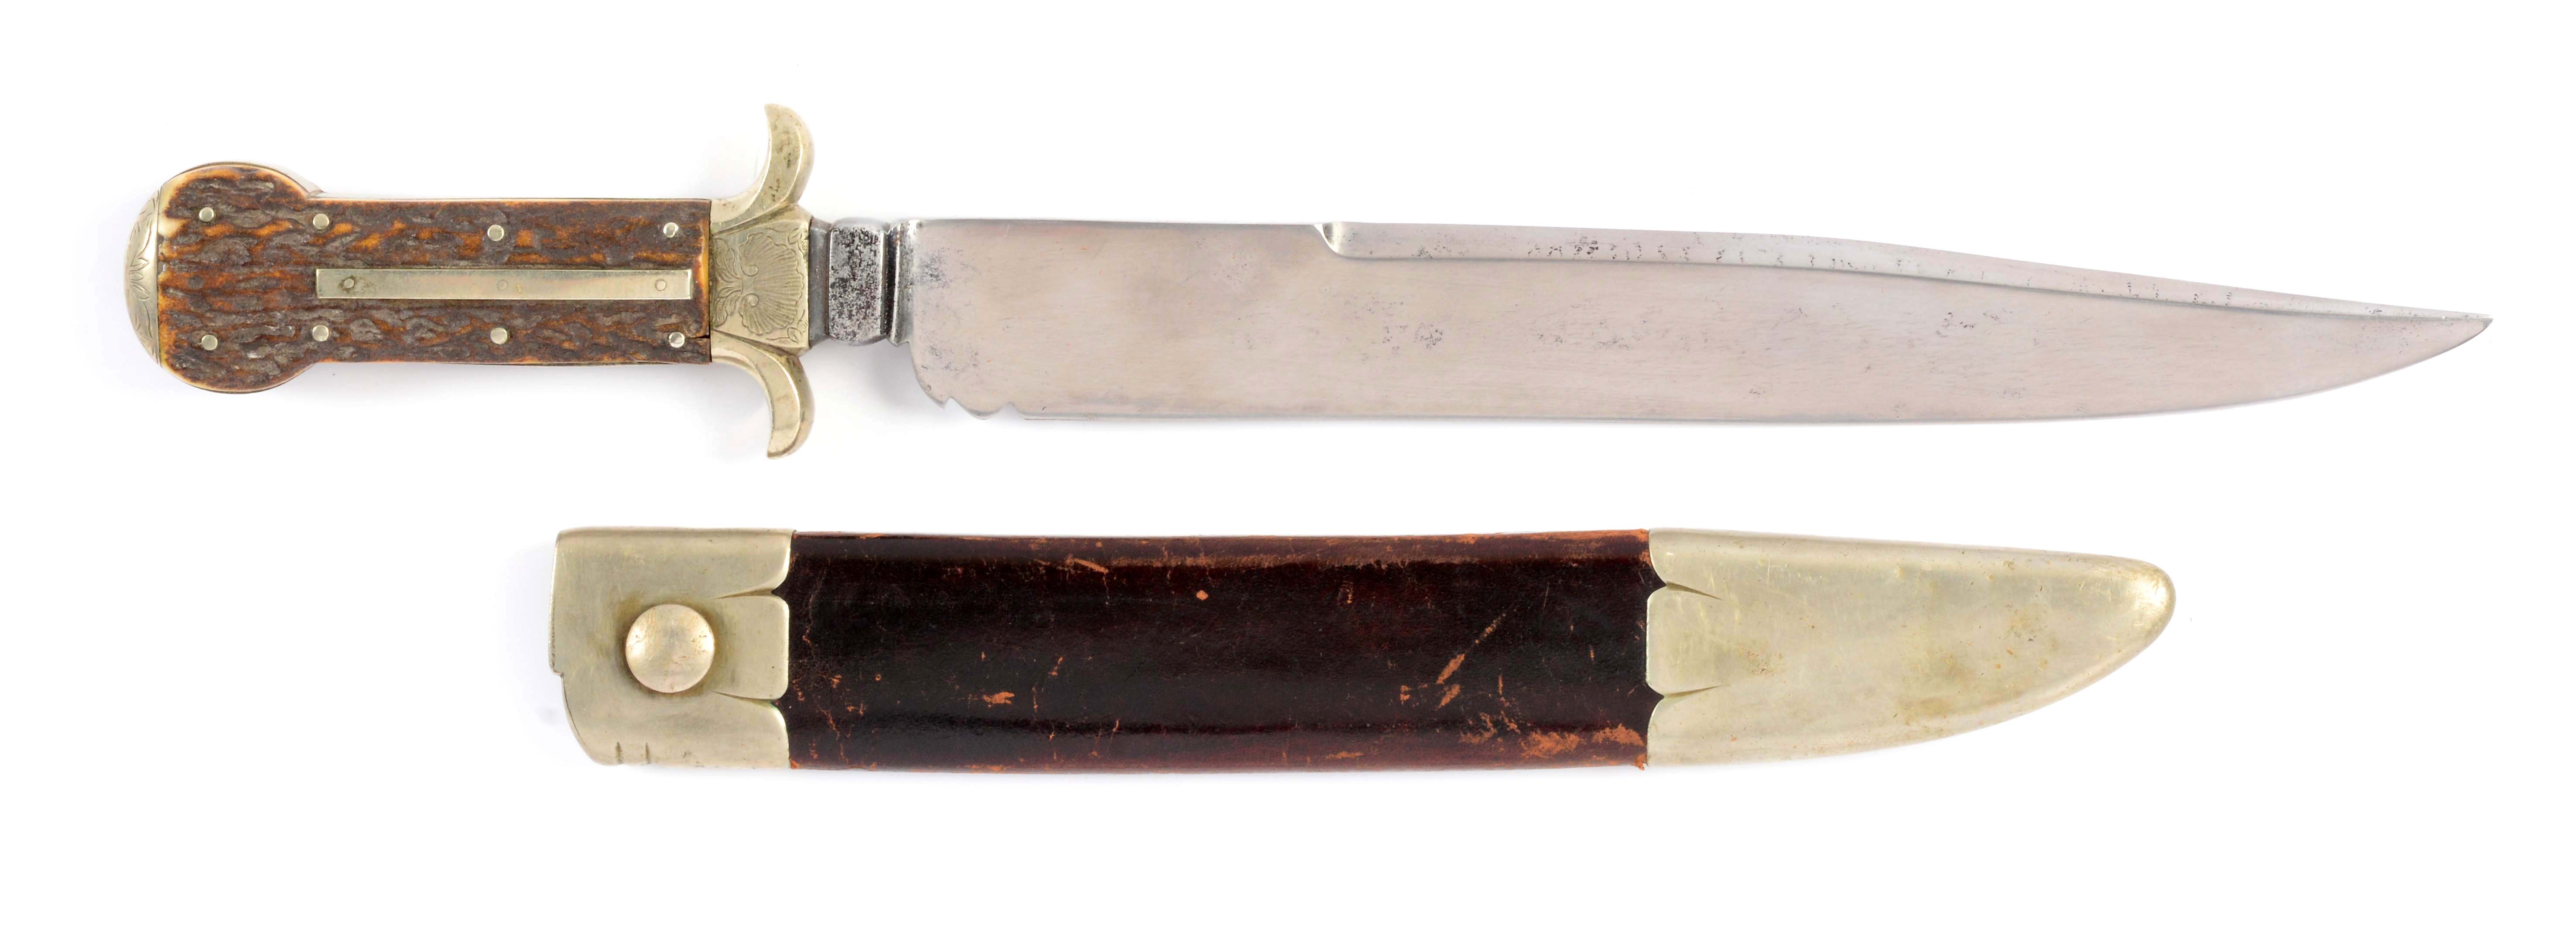 Early Forged-Bolster Dogbone Bowie Knife made for Wolfe & Clarks, NY, estimated at $15,000-18,000.